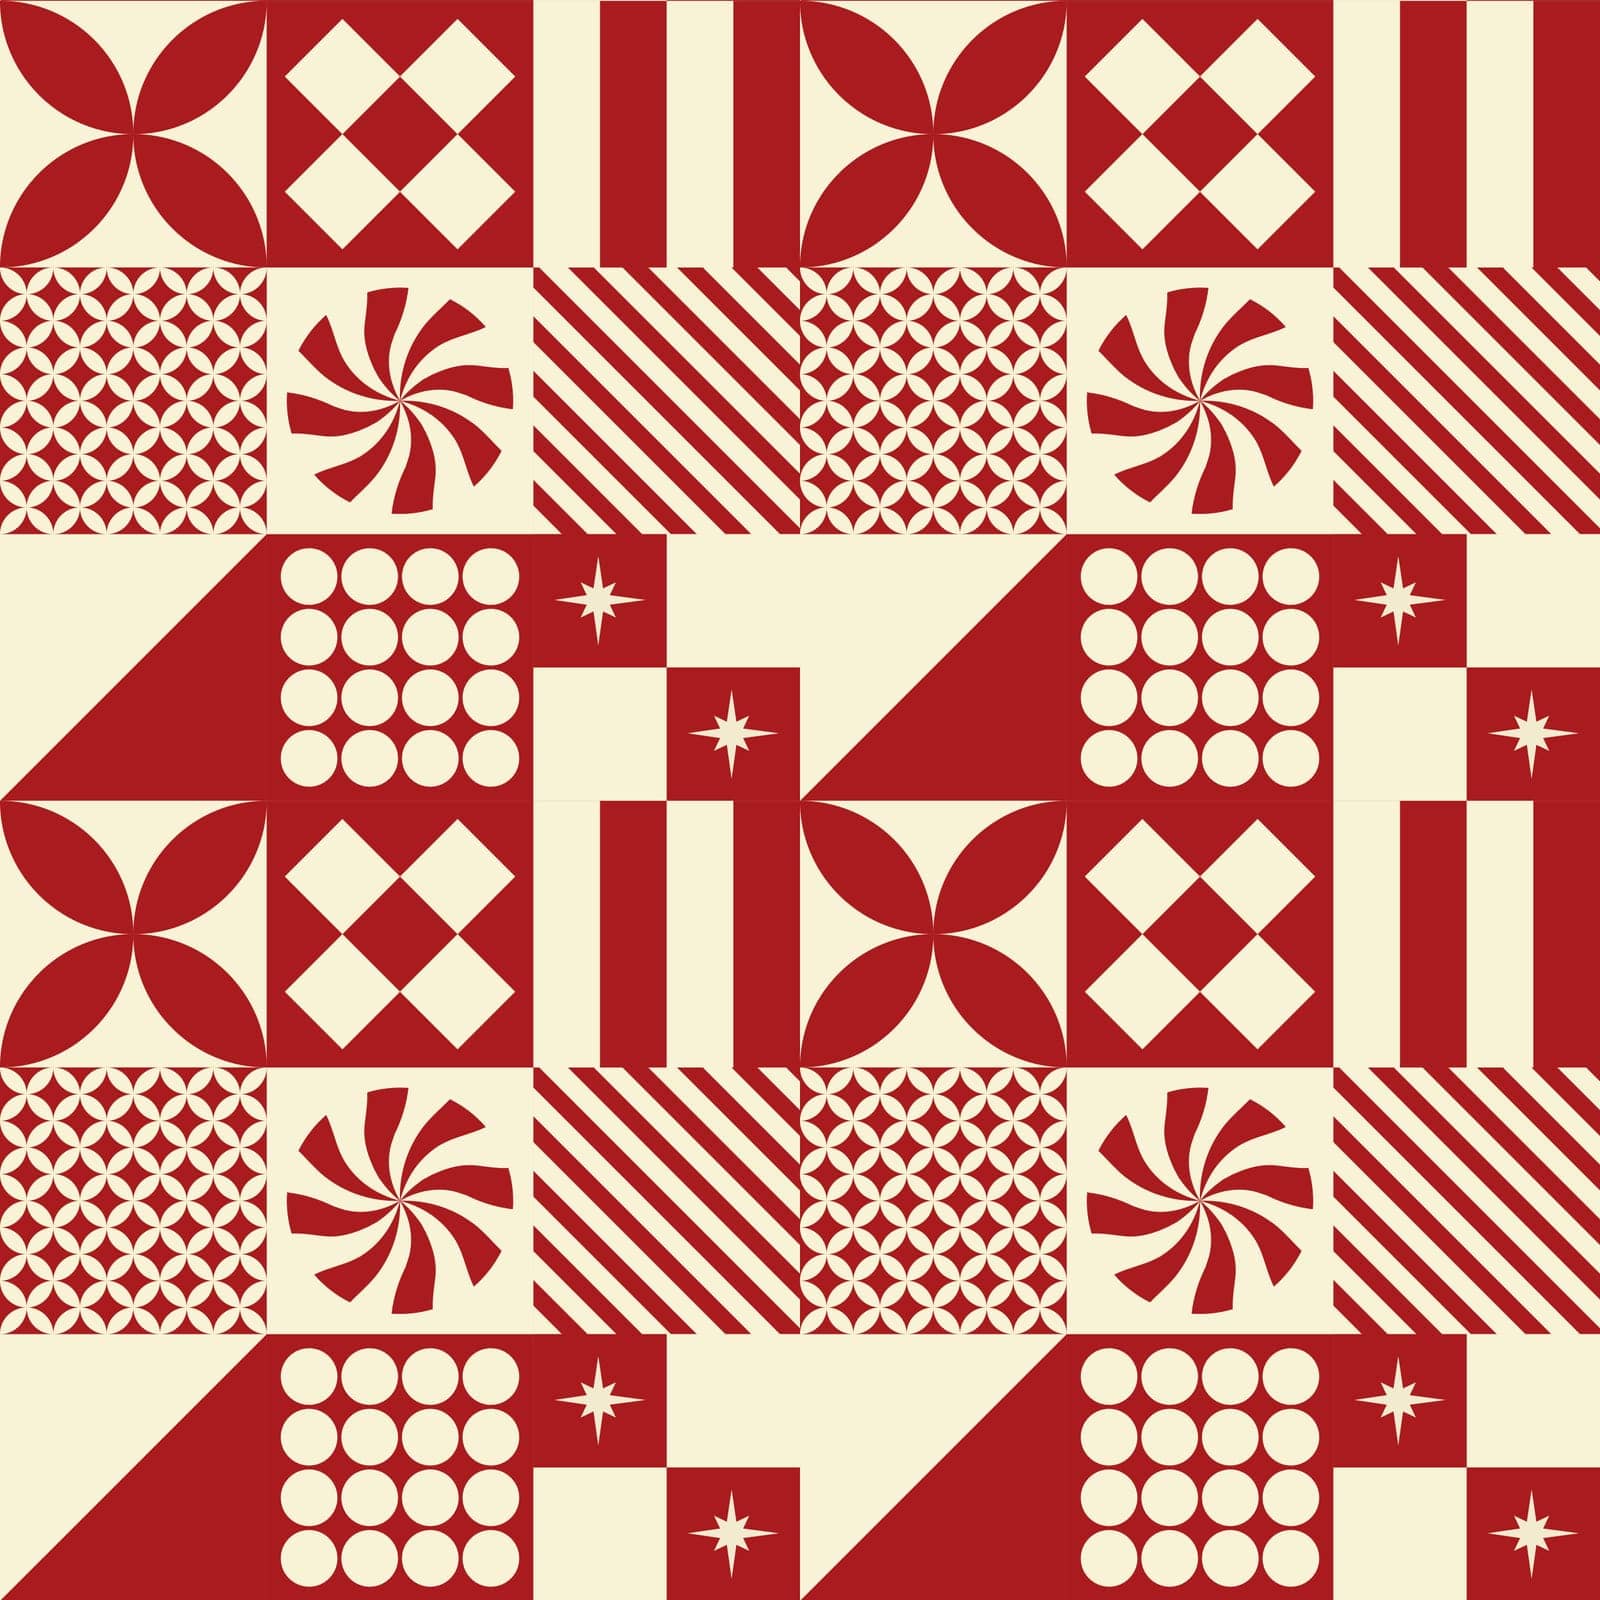 Decorative new year and xmas design pattern print by Sonulkaster